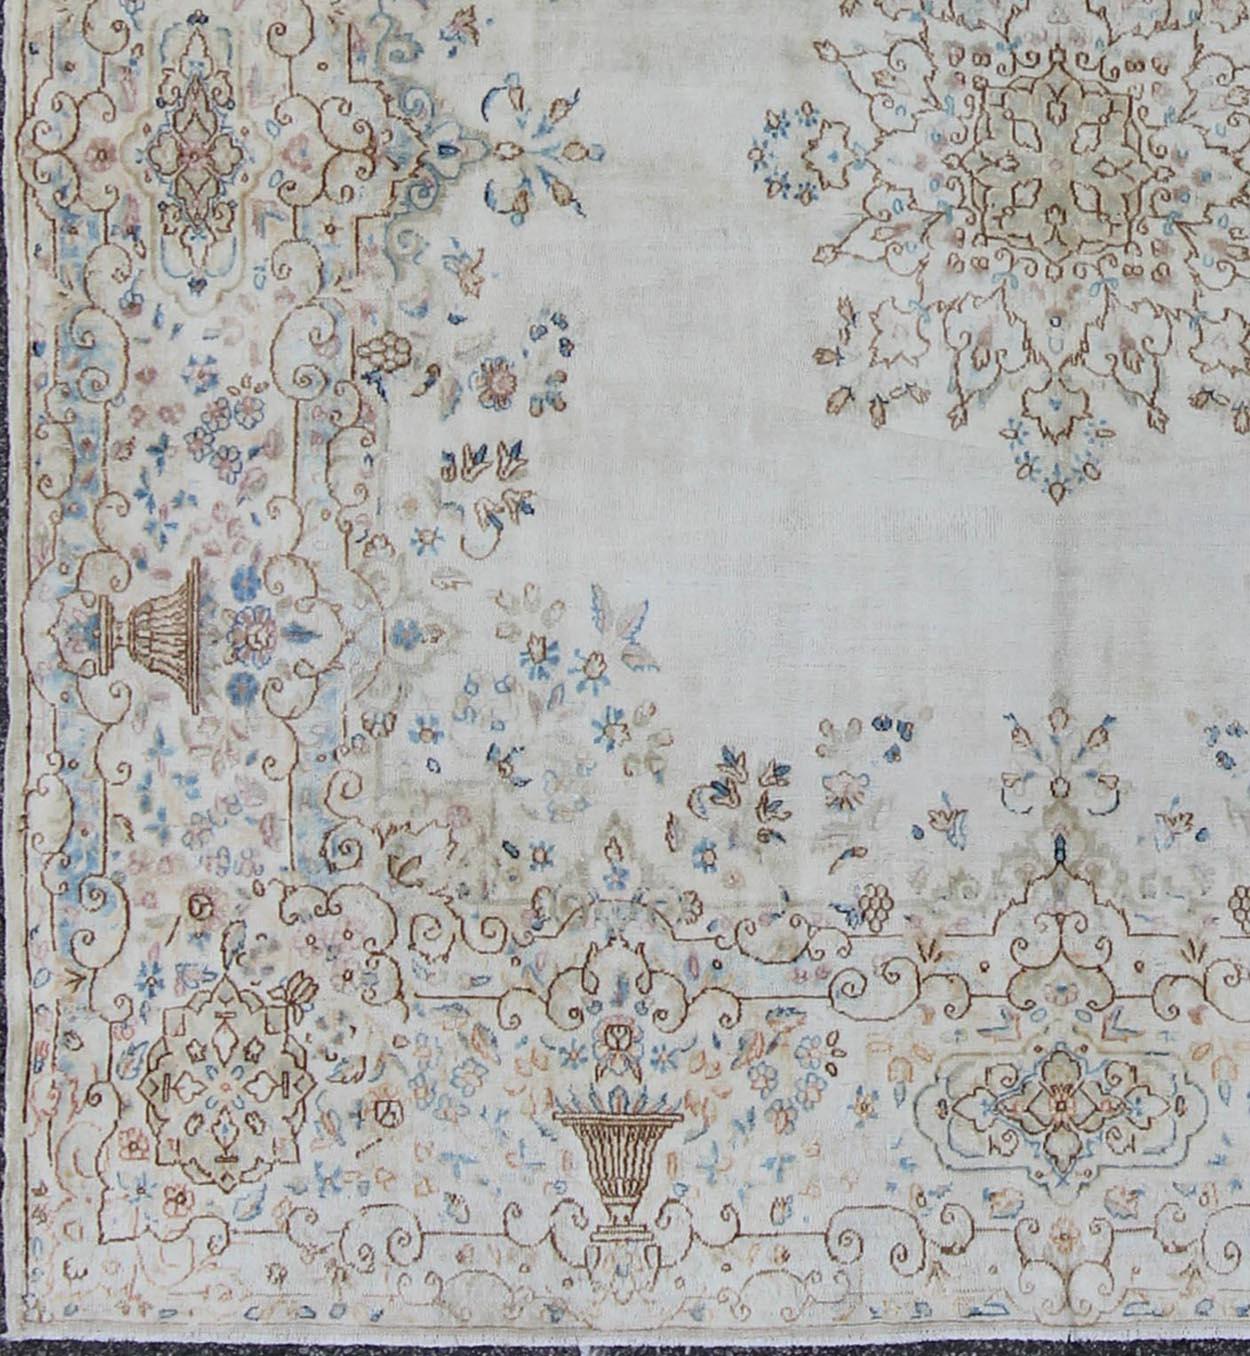 Antique Kerman carpet with floral design, rug F-1002, country of origin / type: Iran / Kerman, circa 1920

This Kerman carpet from early 20th century Persia features a floral design set atop a light background.
Measures: 6'10 x 7'1.
 